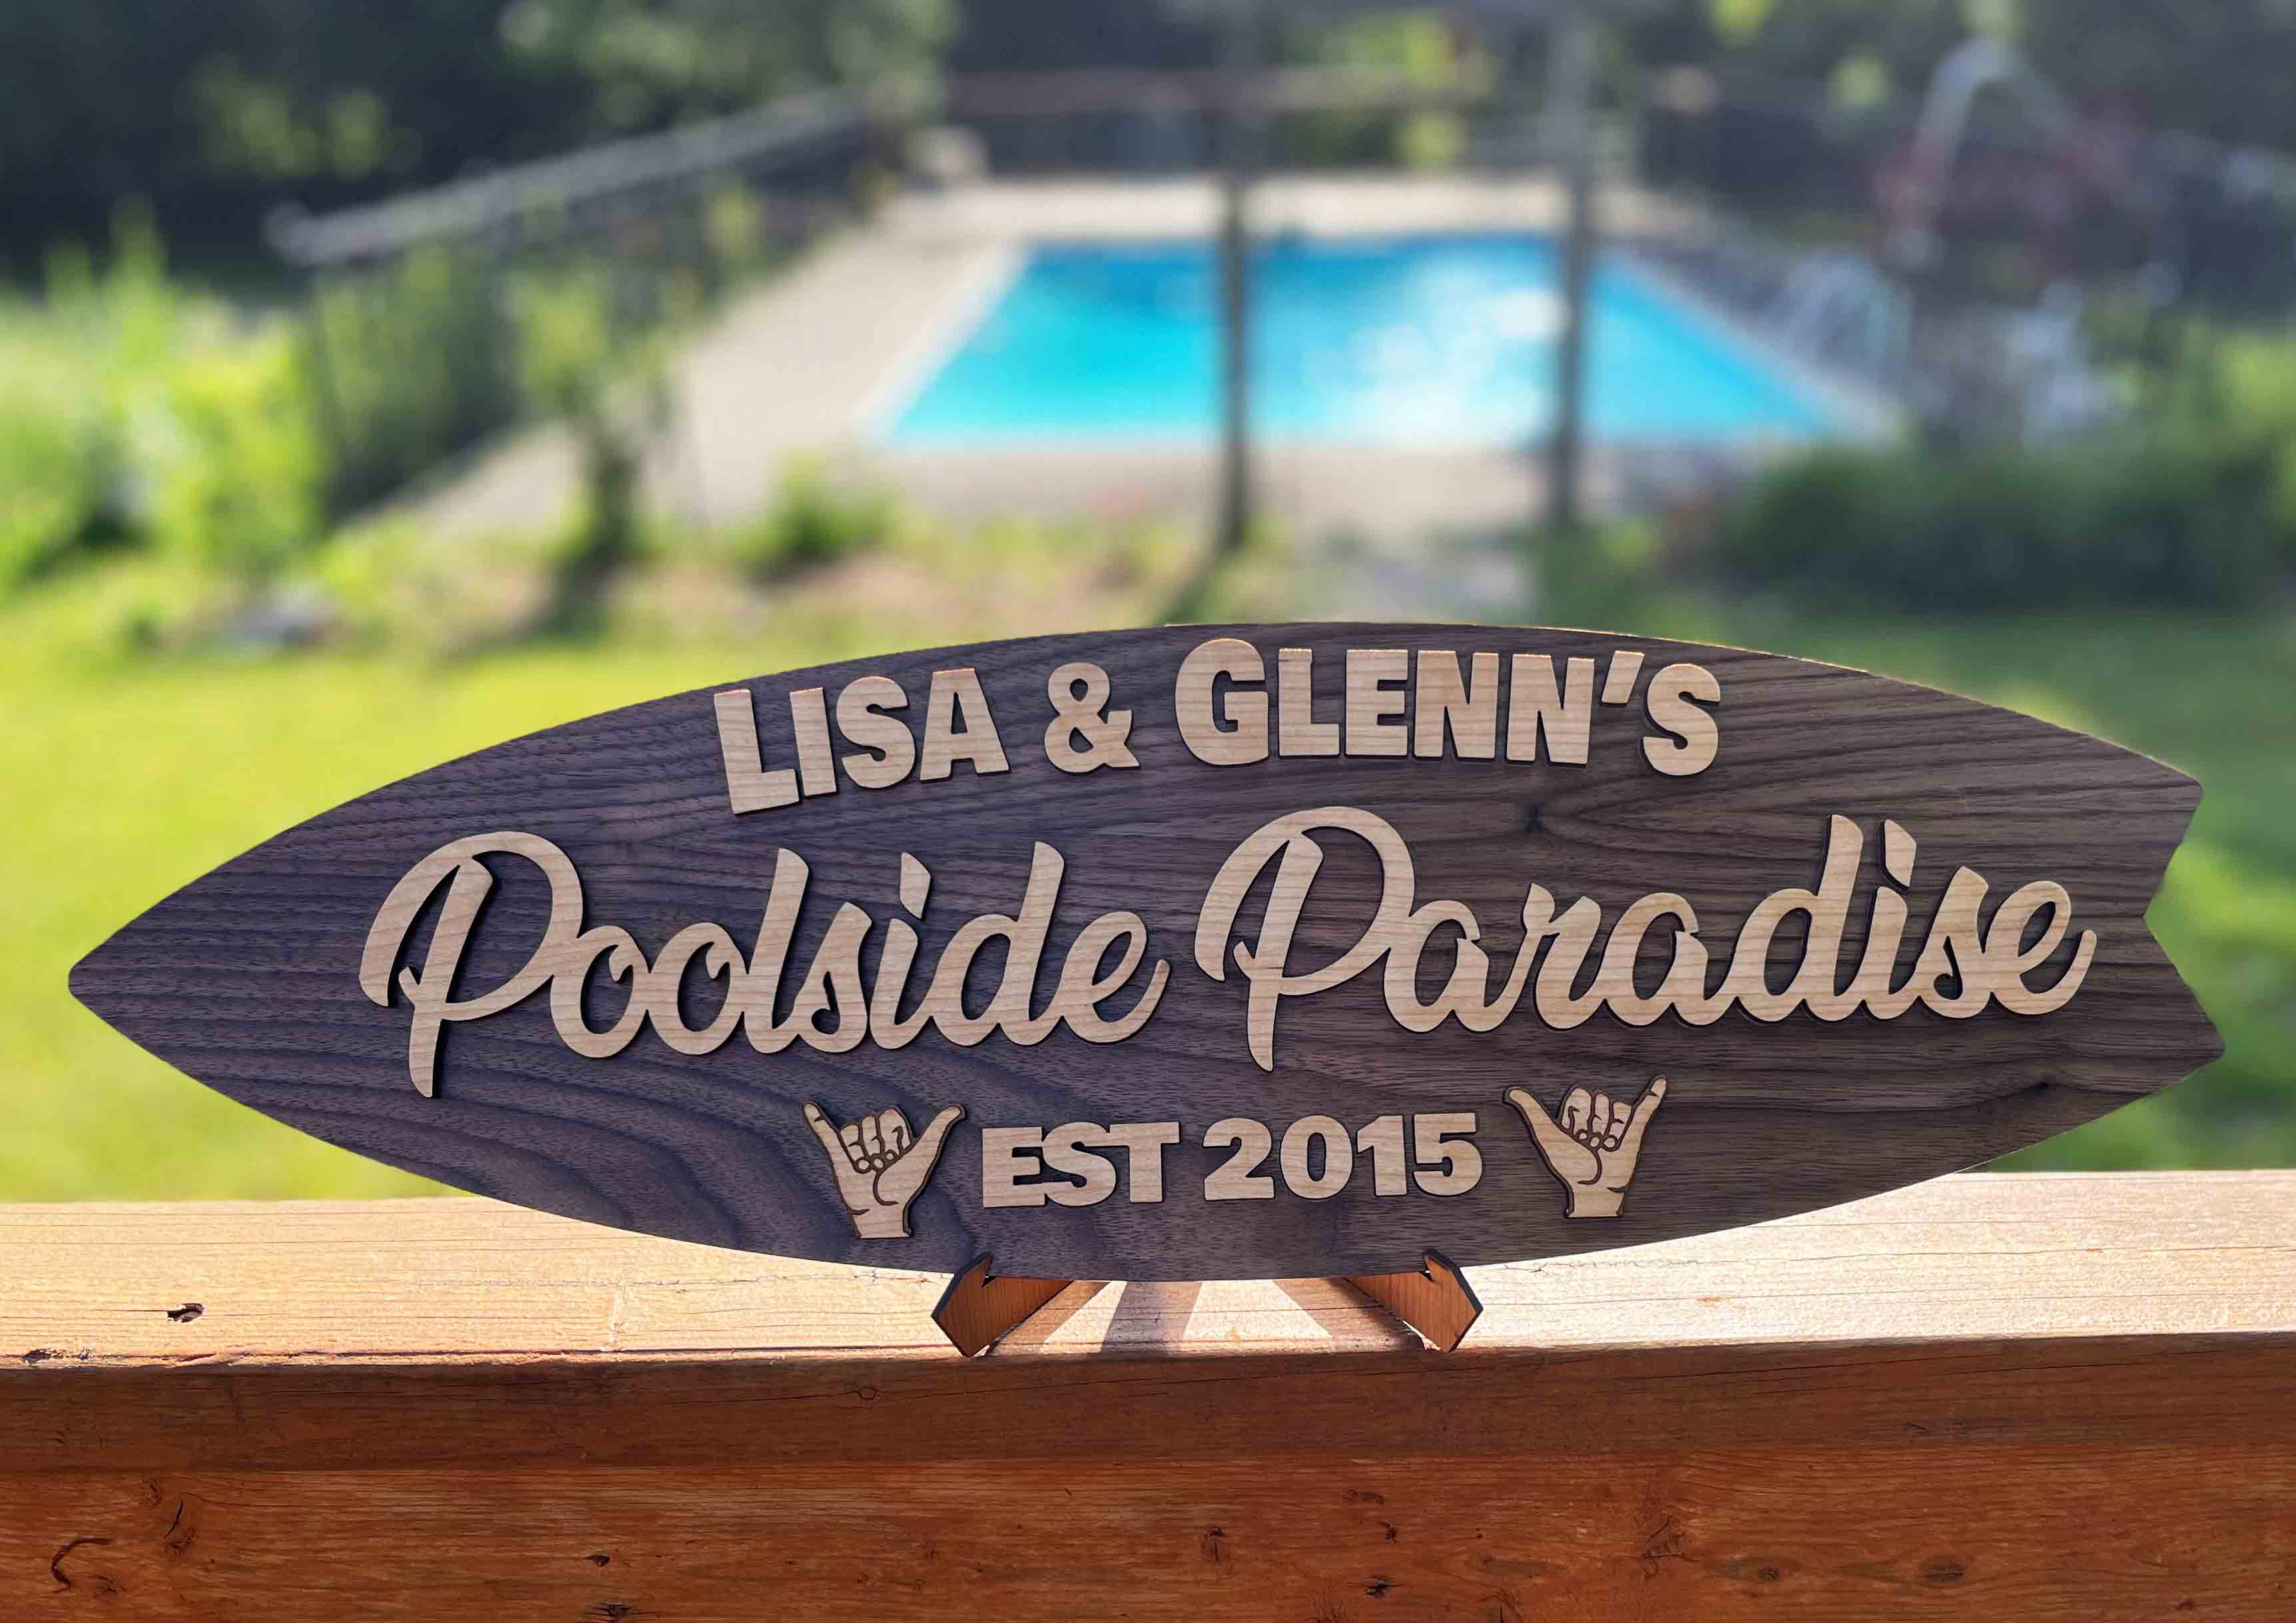 Surfboard Poolside Paradise Sign.